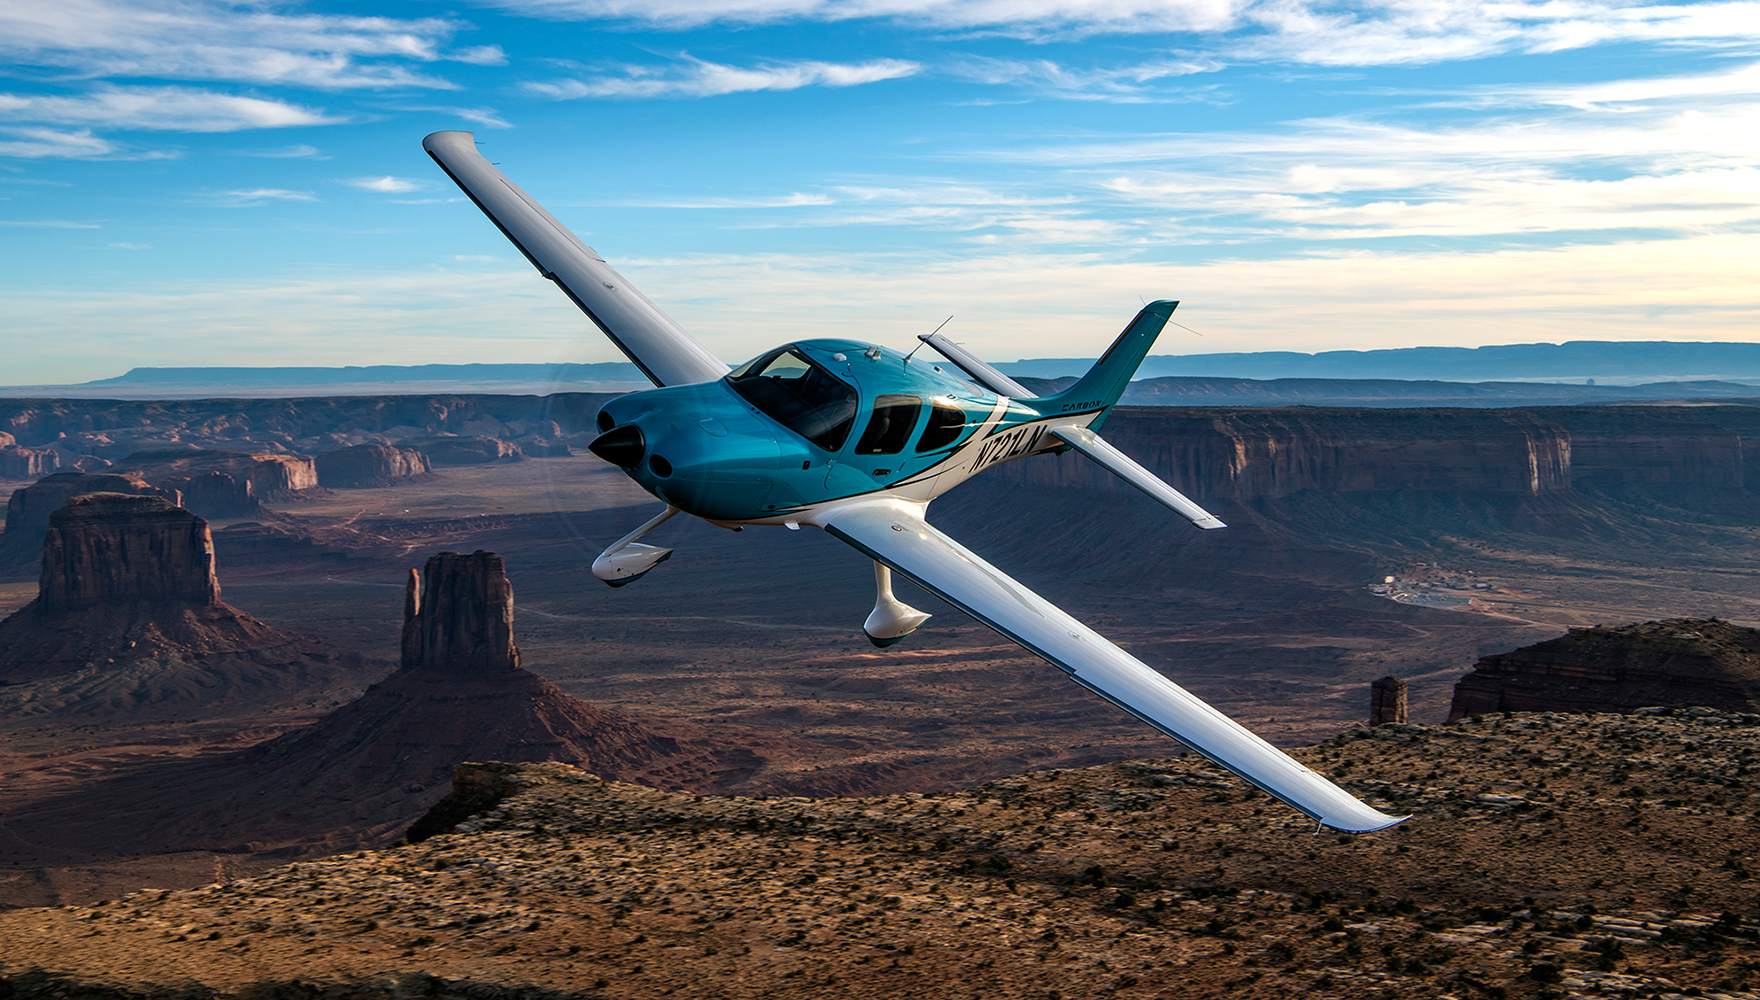 Cirrus Aircraft today announced continued expansion with the opening of its new Cirrus Flight Training facility located at the Scottsdale Airport (KSDL) in Arizona, as well as two new satellite Cirrus Aircraft Innovation Centers in Chandler, Arizona and in McKinney, Texas.